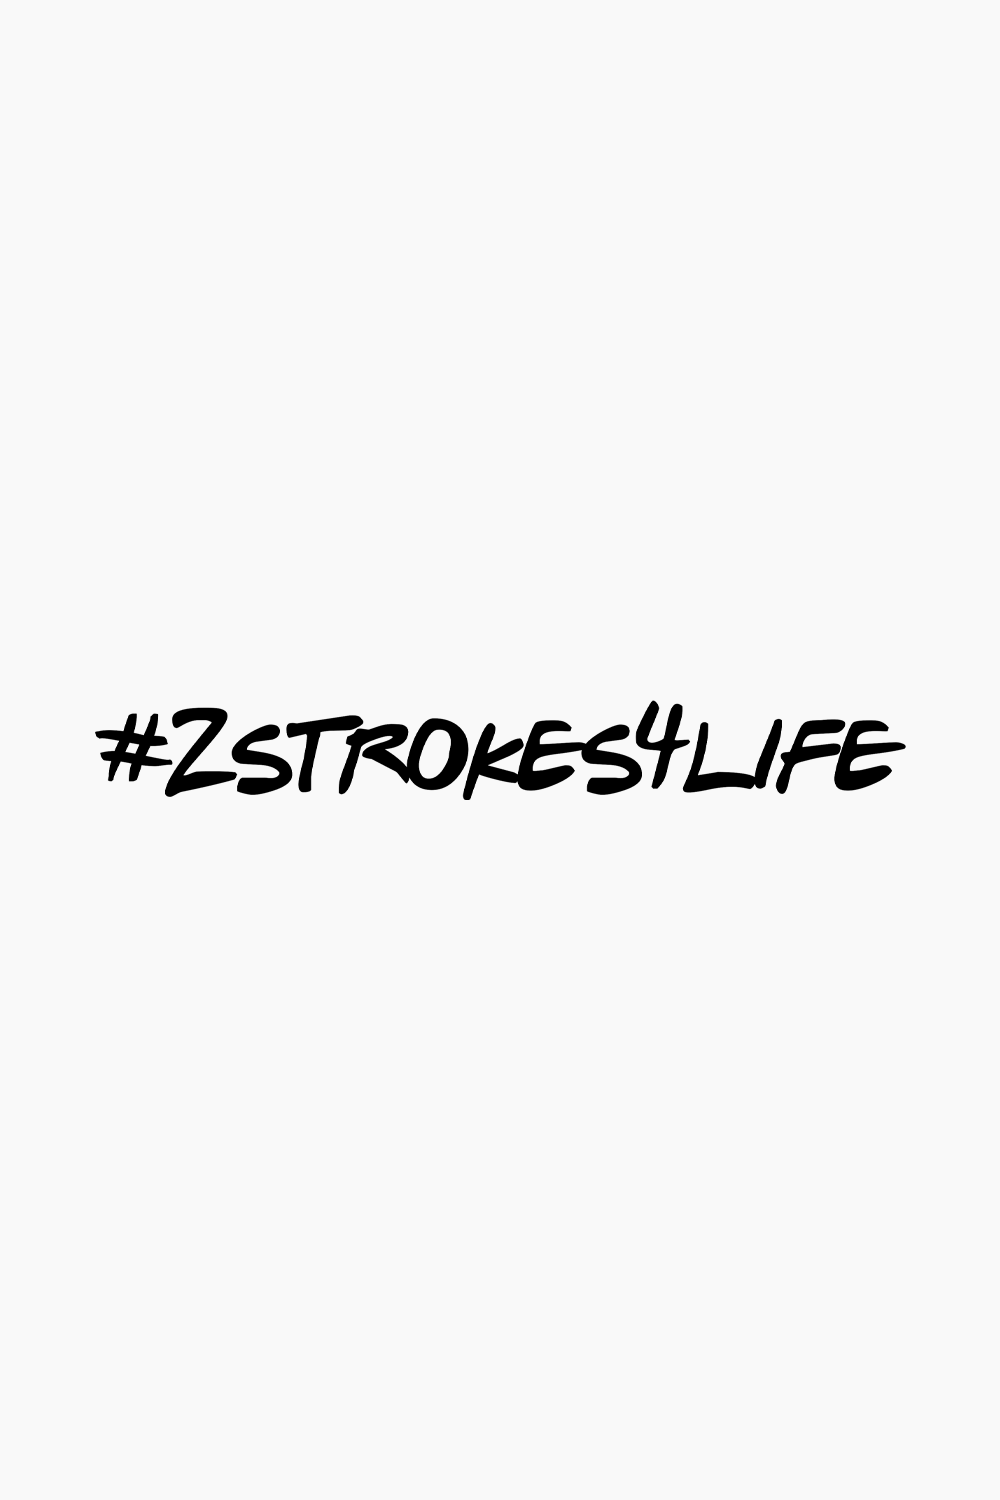 #2Strokes4Life Decal